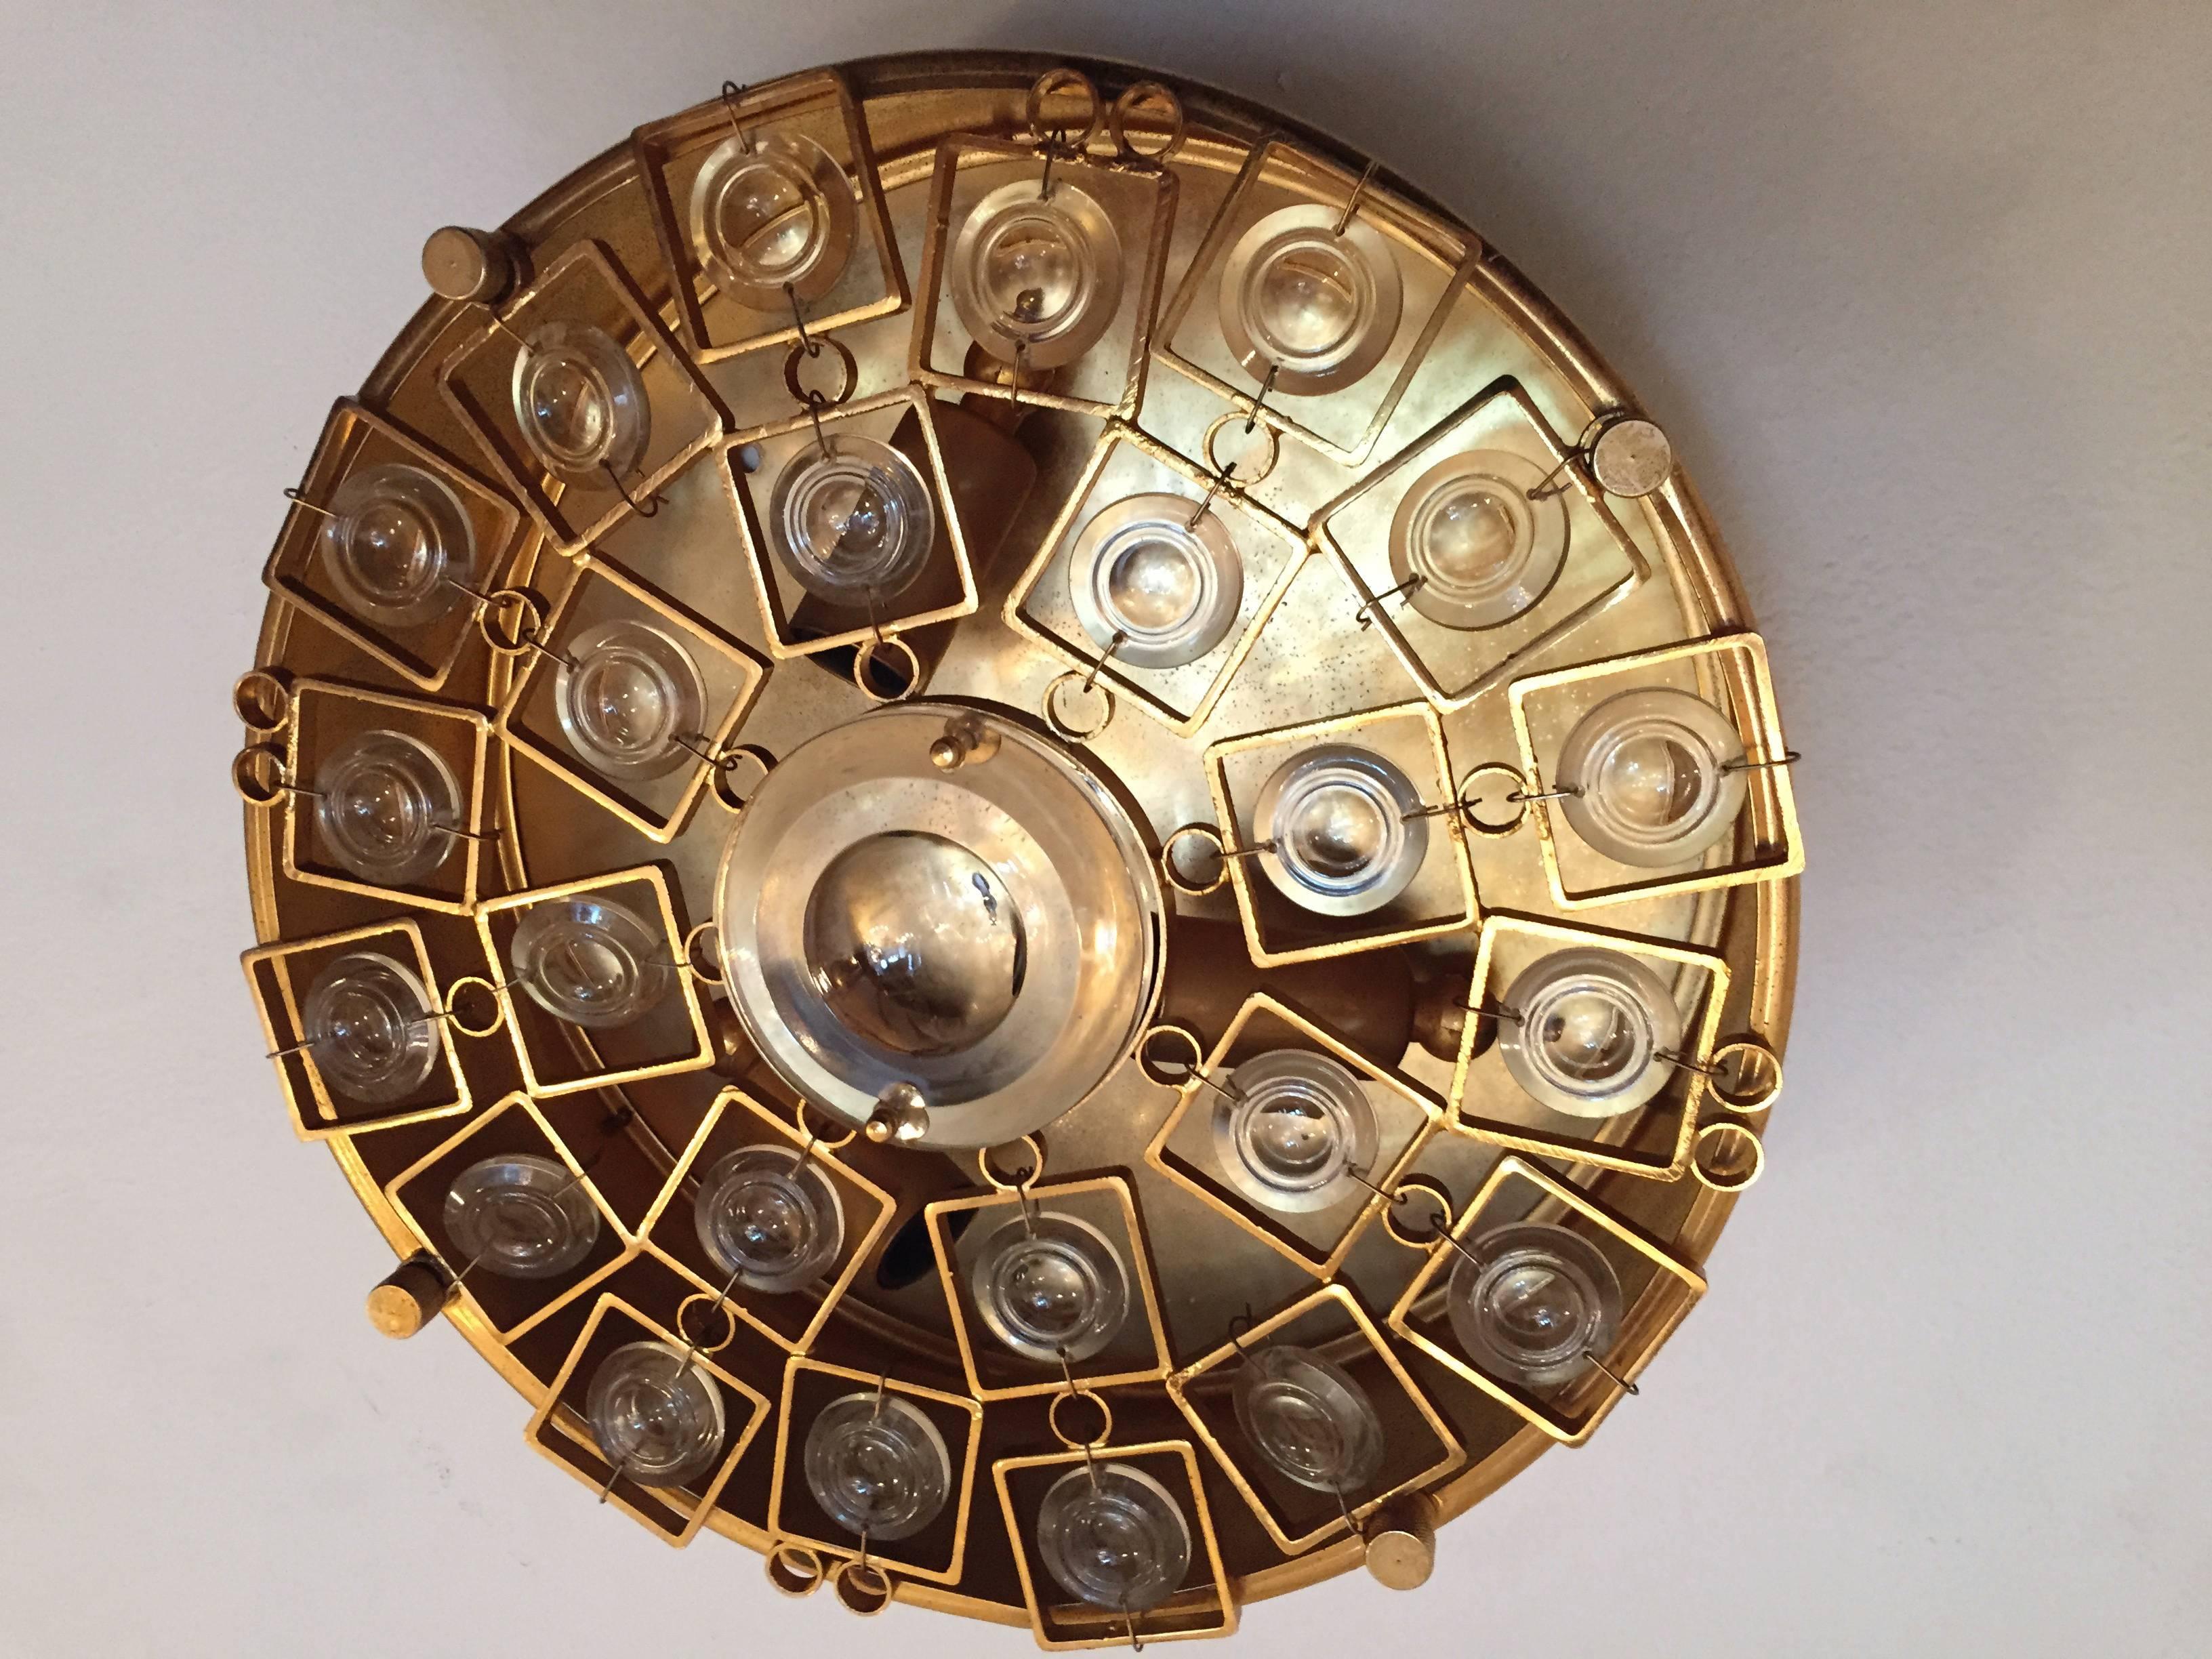 A luxurious Italian high style 1960s golden gilt flush ceiling light with large cut crystals by Oscar Torlasco for Stikronen. Rewired. Three light sources.